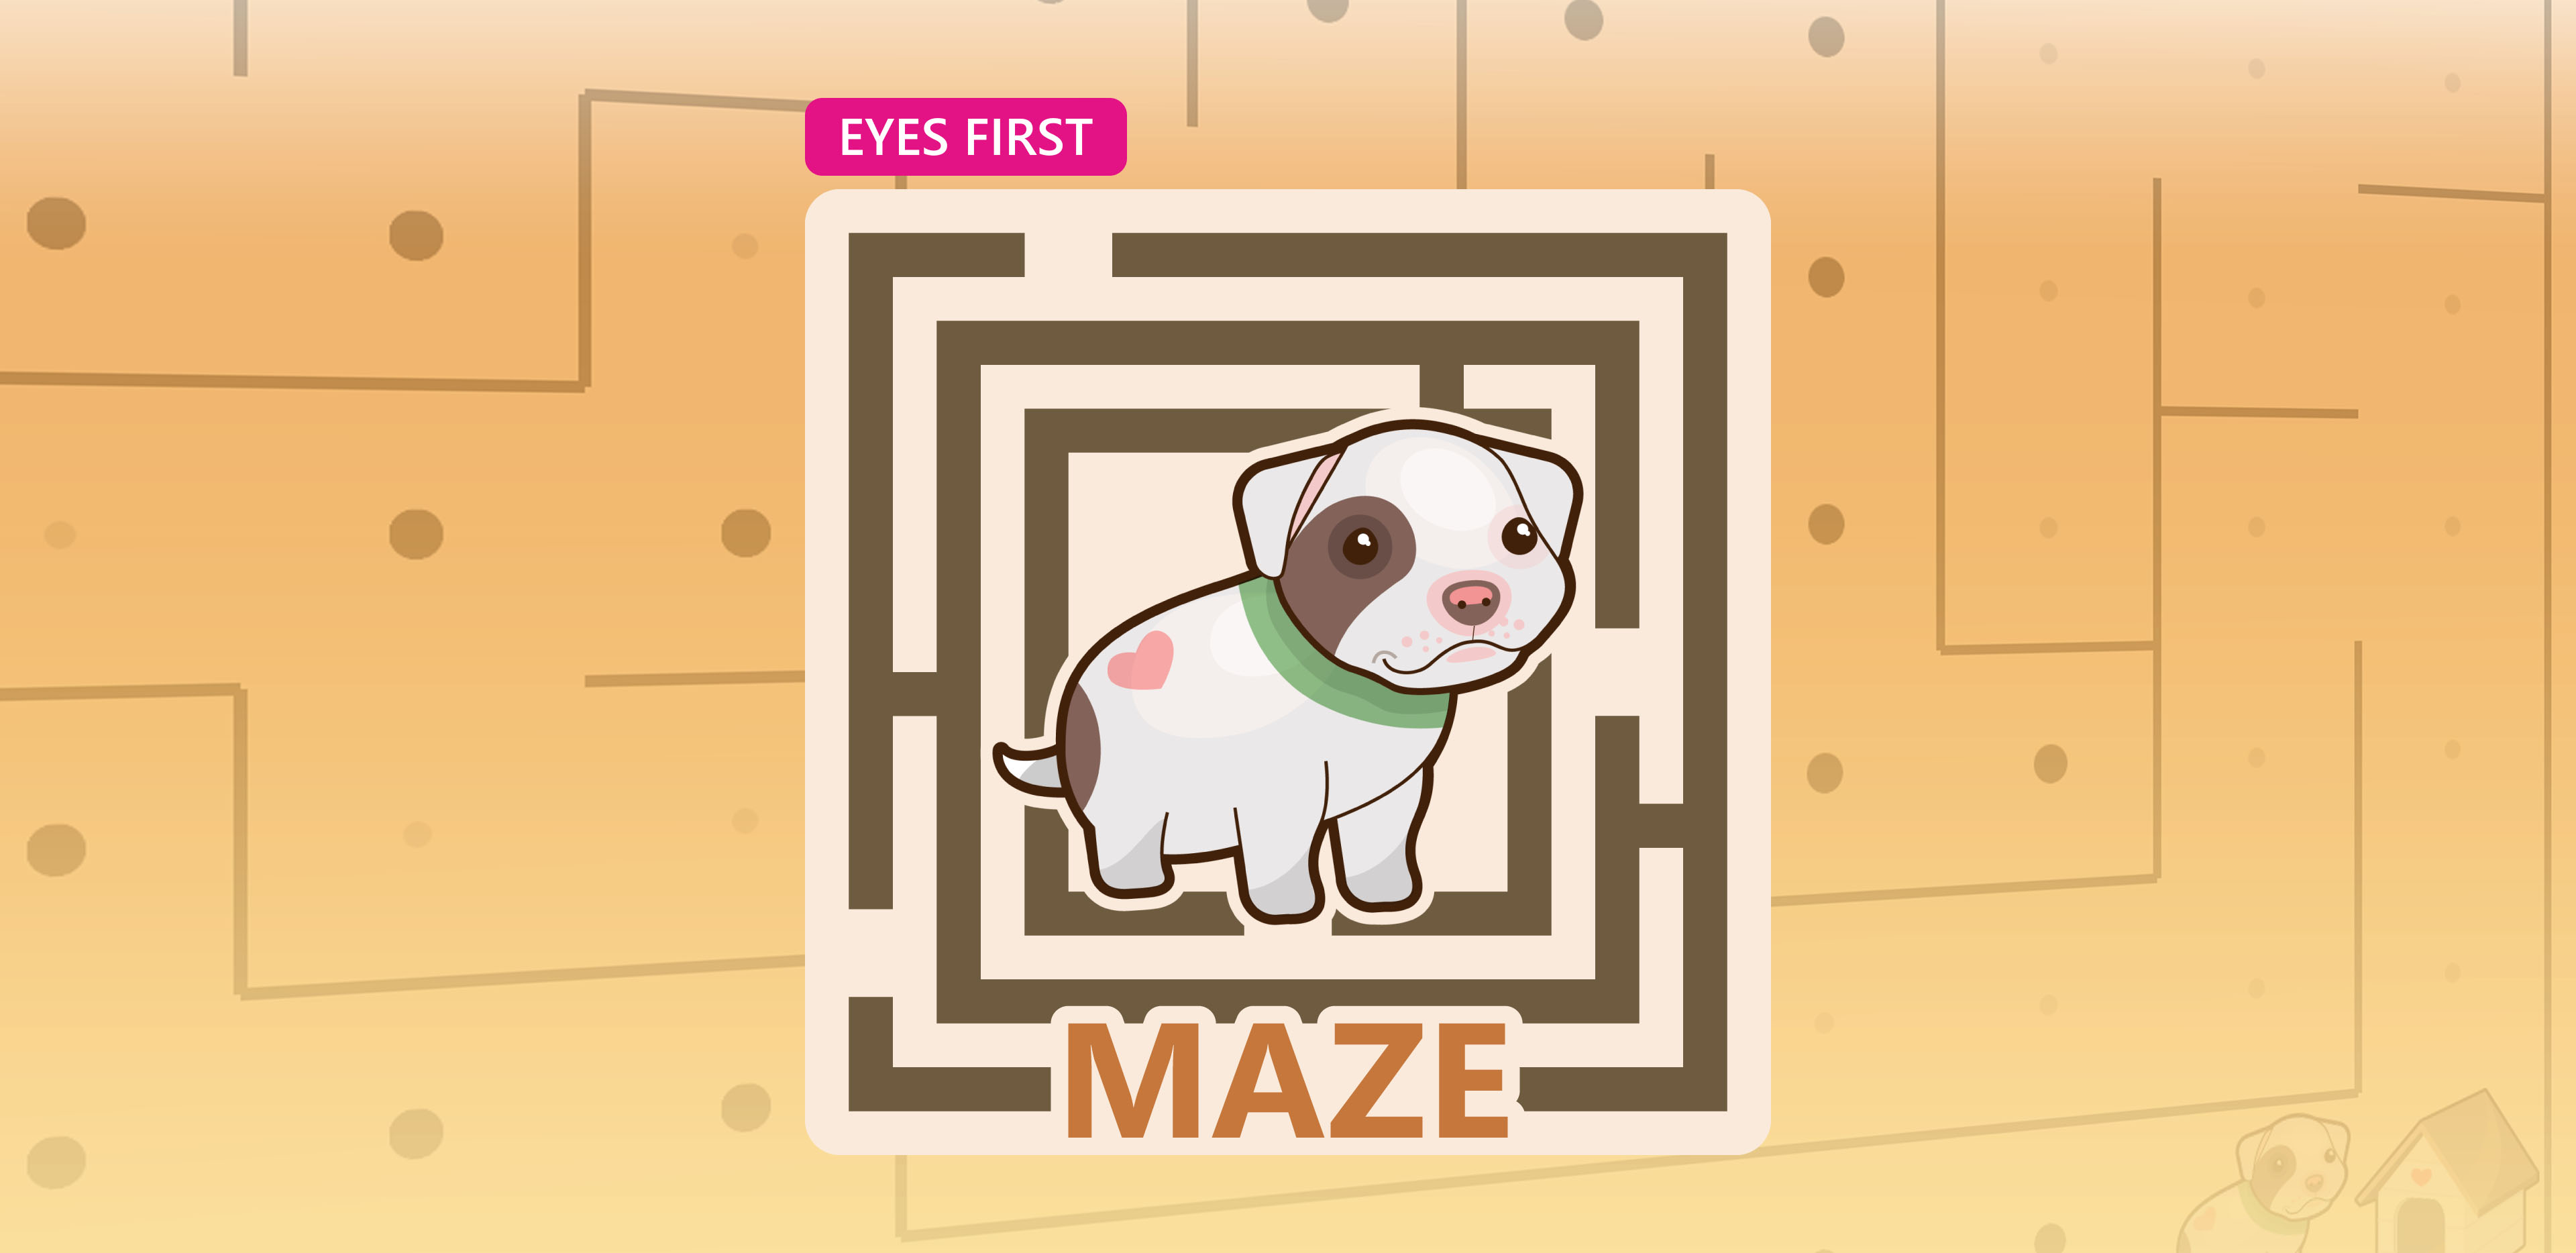 A spotted puppy sits in the middle of a maze with the word 